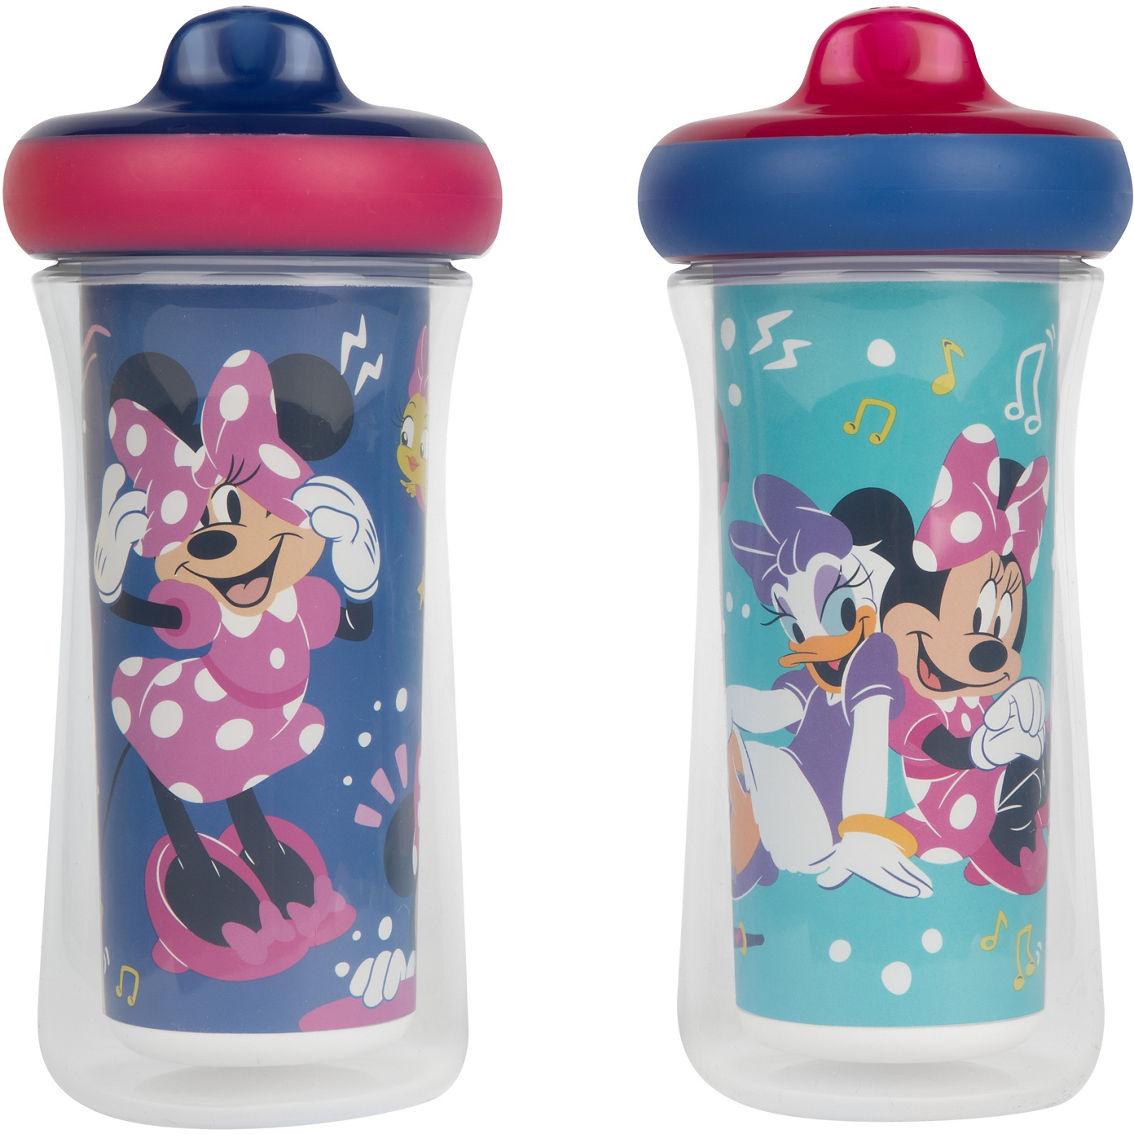 Disney Baby Minnie Mouse Insulated Sippy Cup 2 pk. - Image 2 of 6